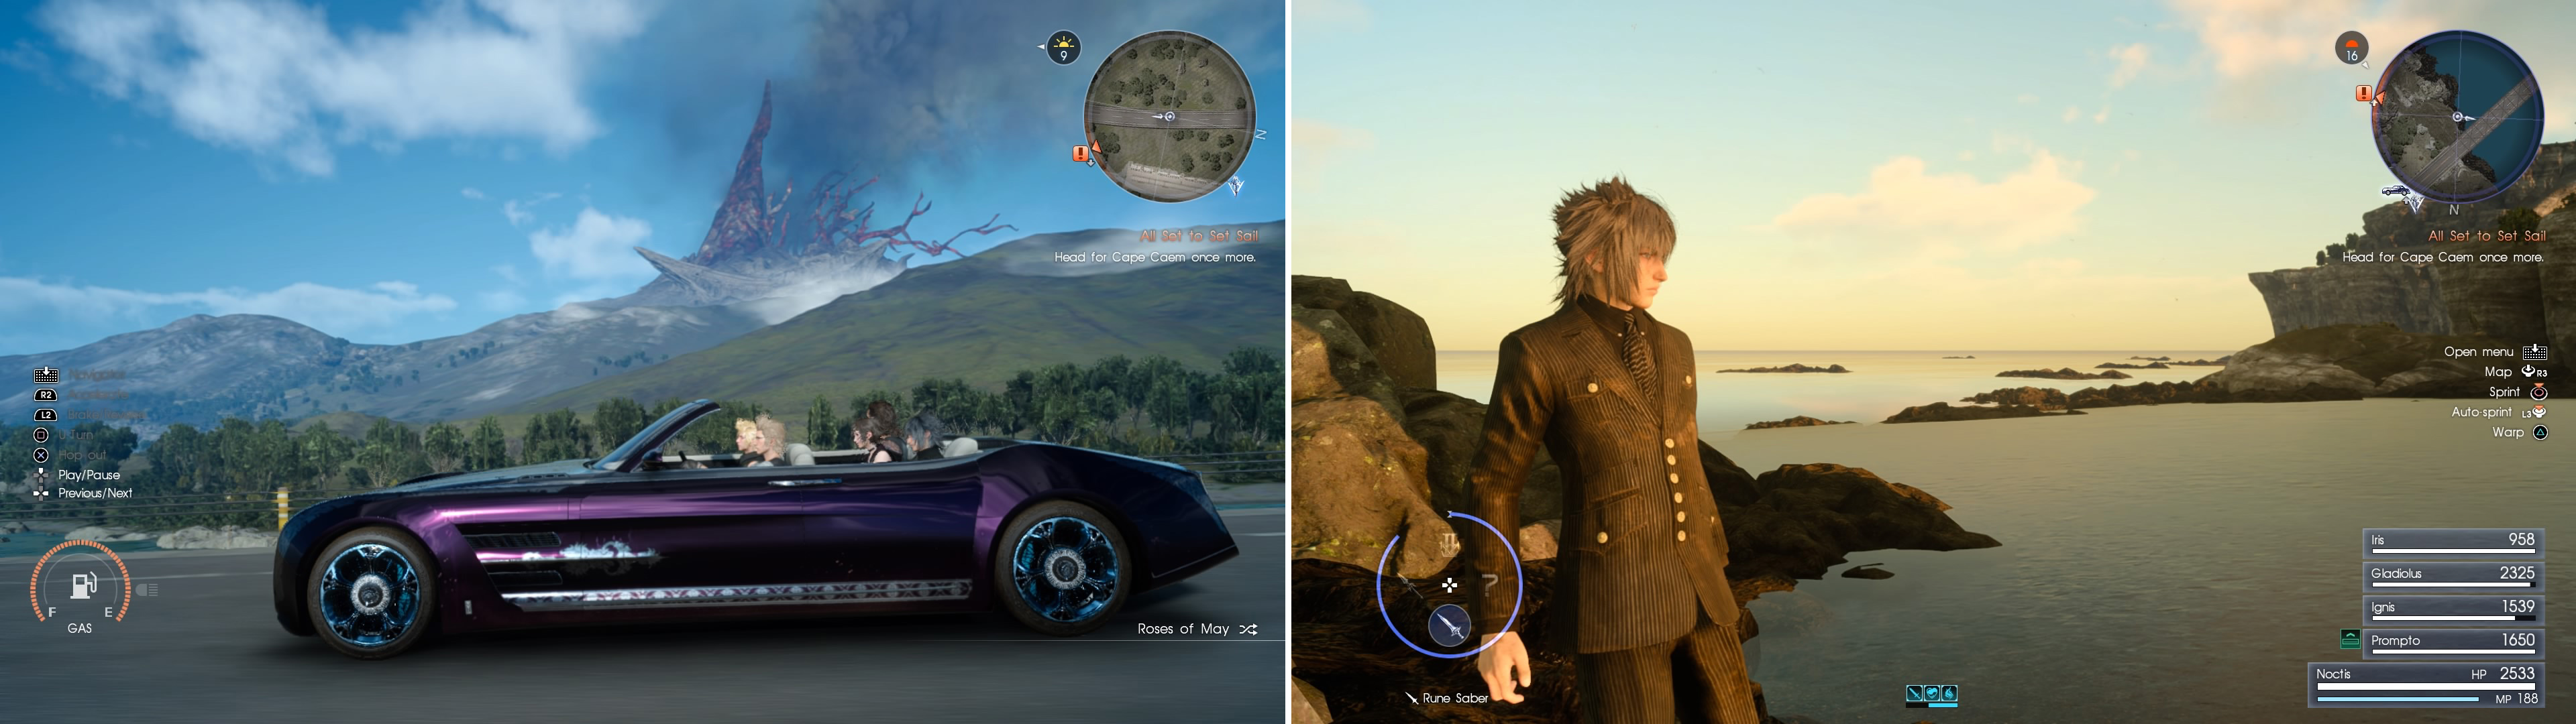 Set out on the road again (left) and when asked, take in the sights at the various pit stops along the way (right).